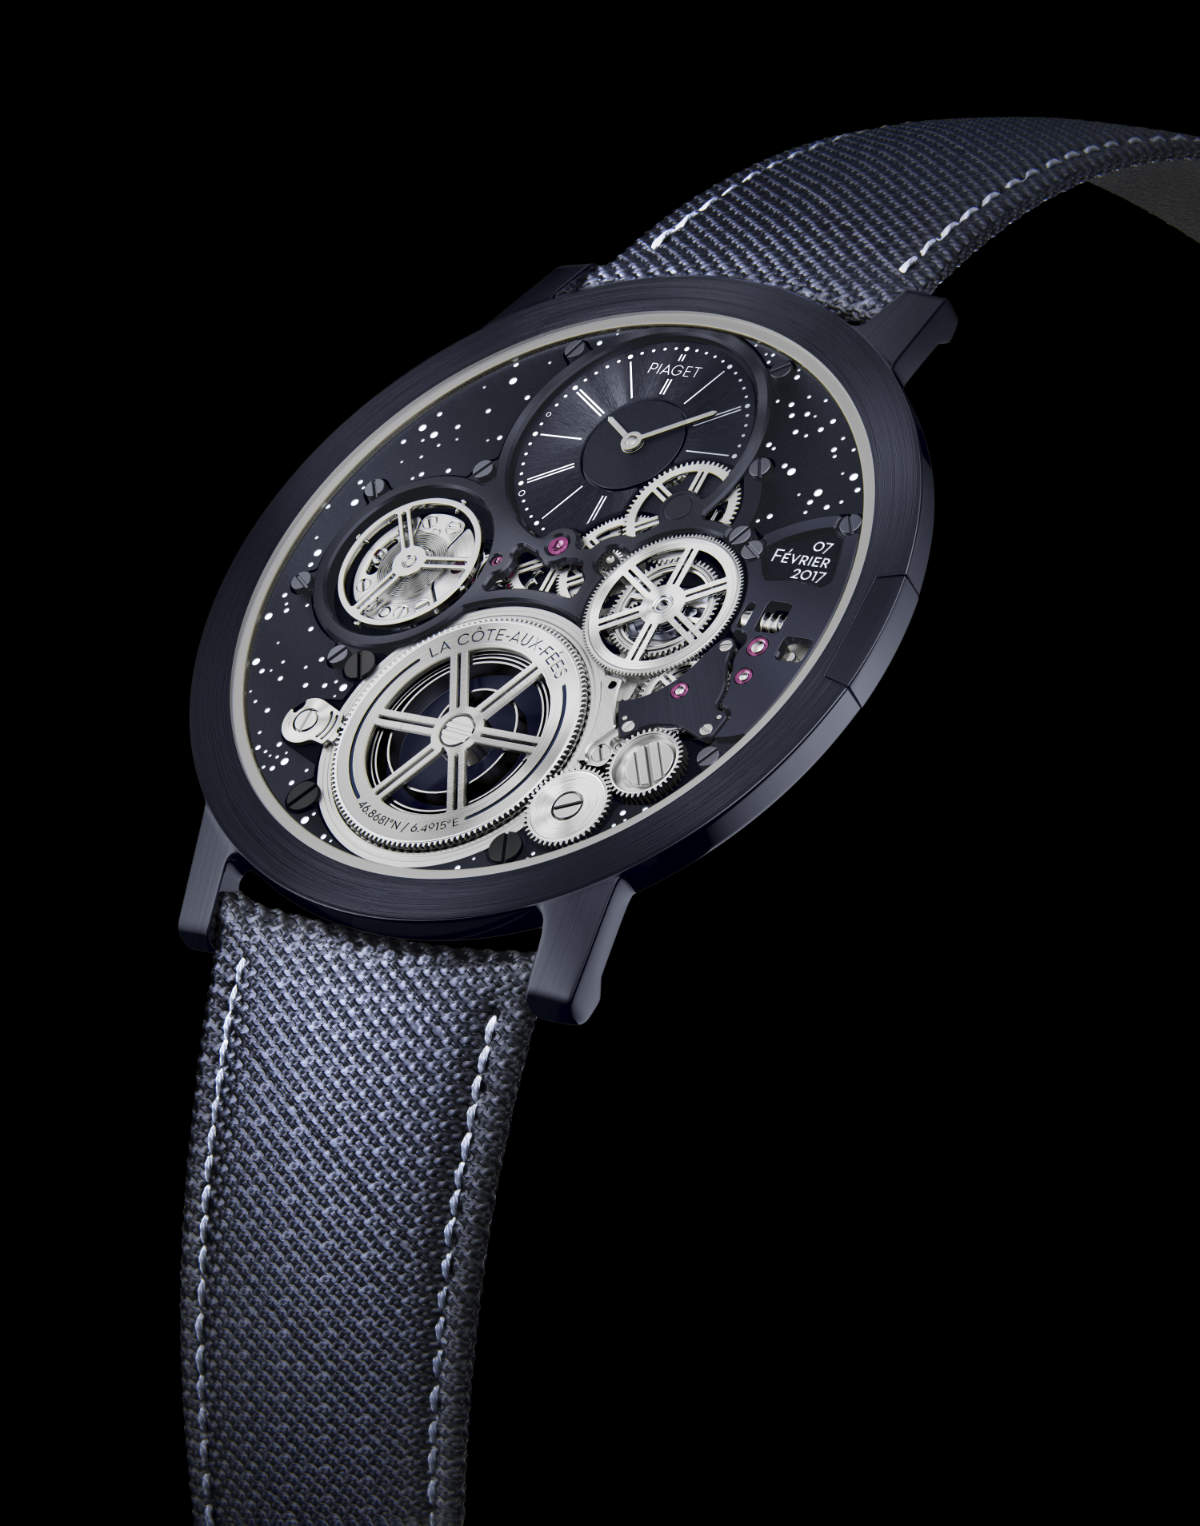 Piaget: A One-of-a-kind Tribute To The Altiplano Ultimate Concept